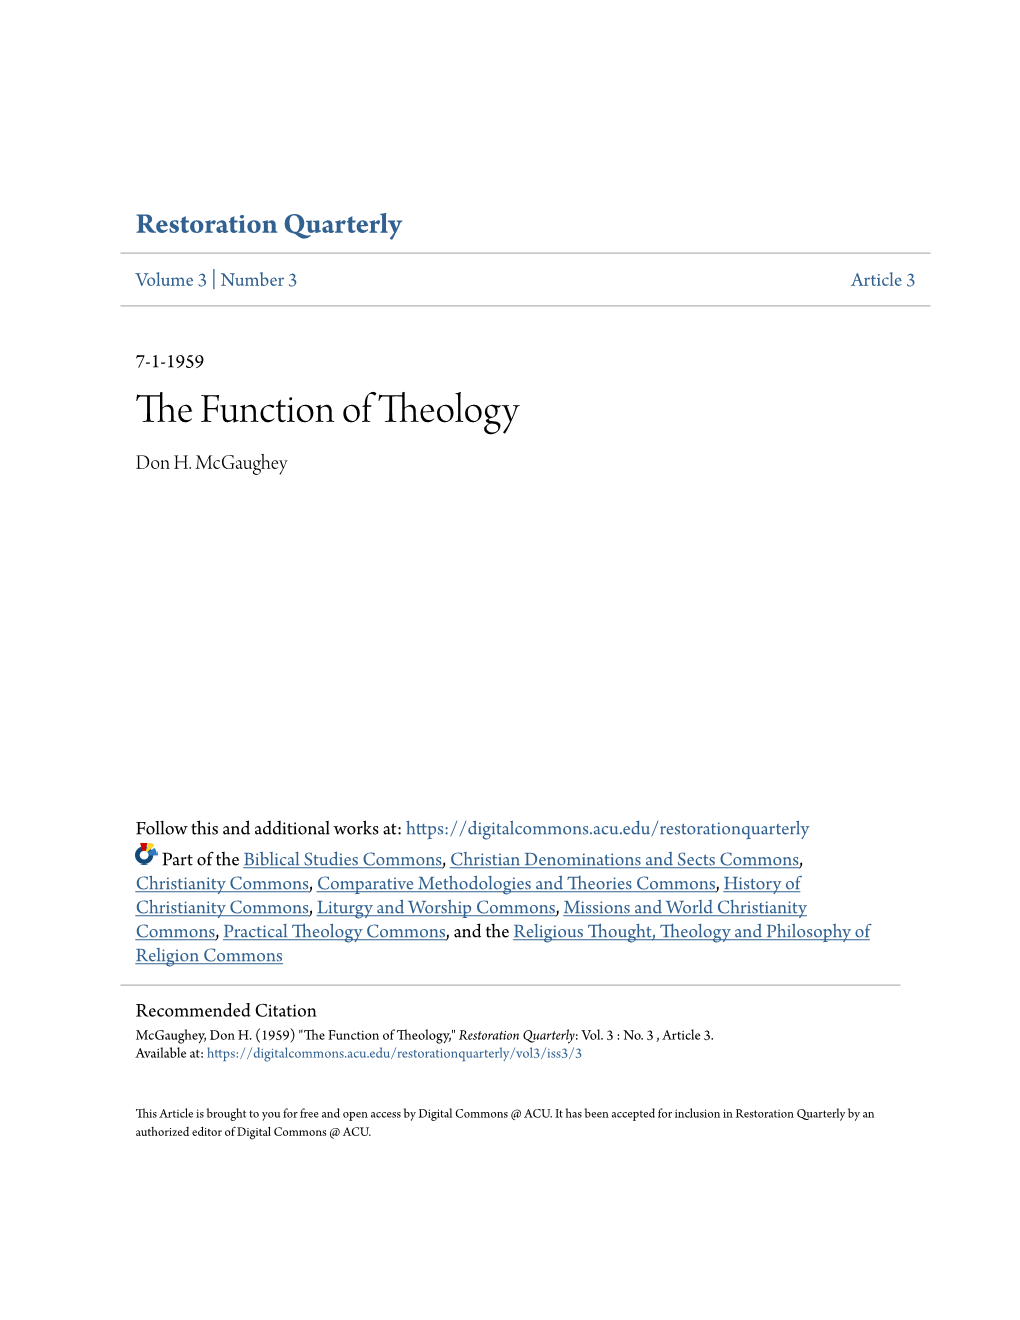 The Function of Theology